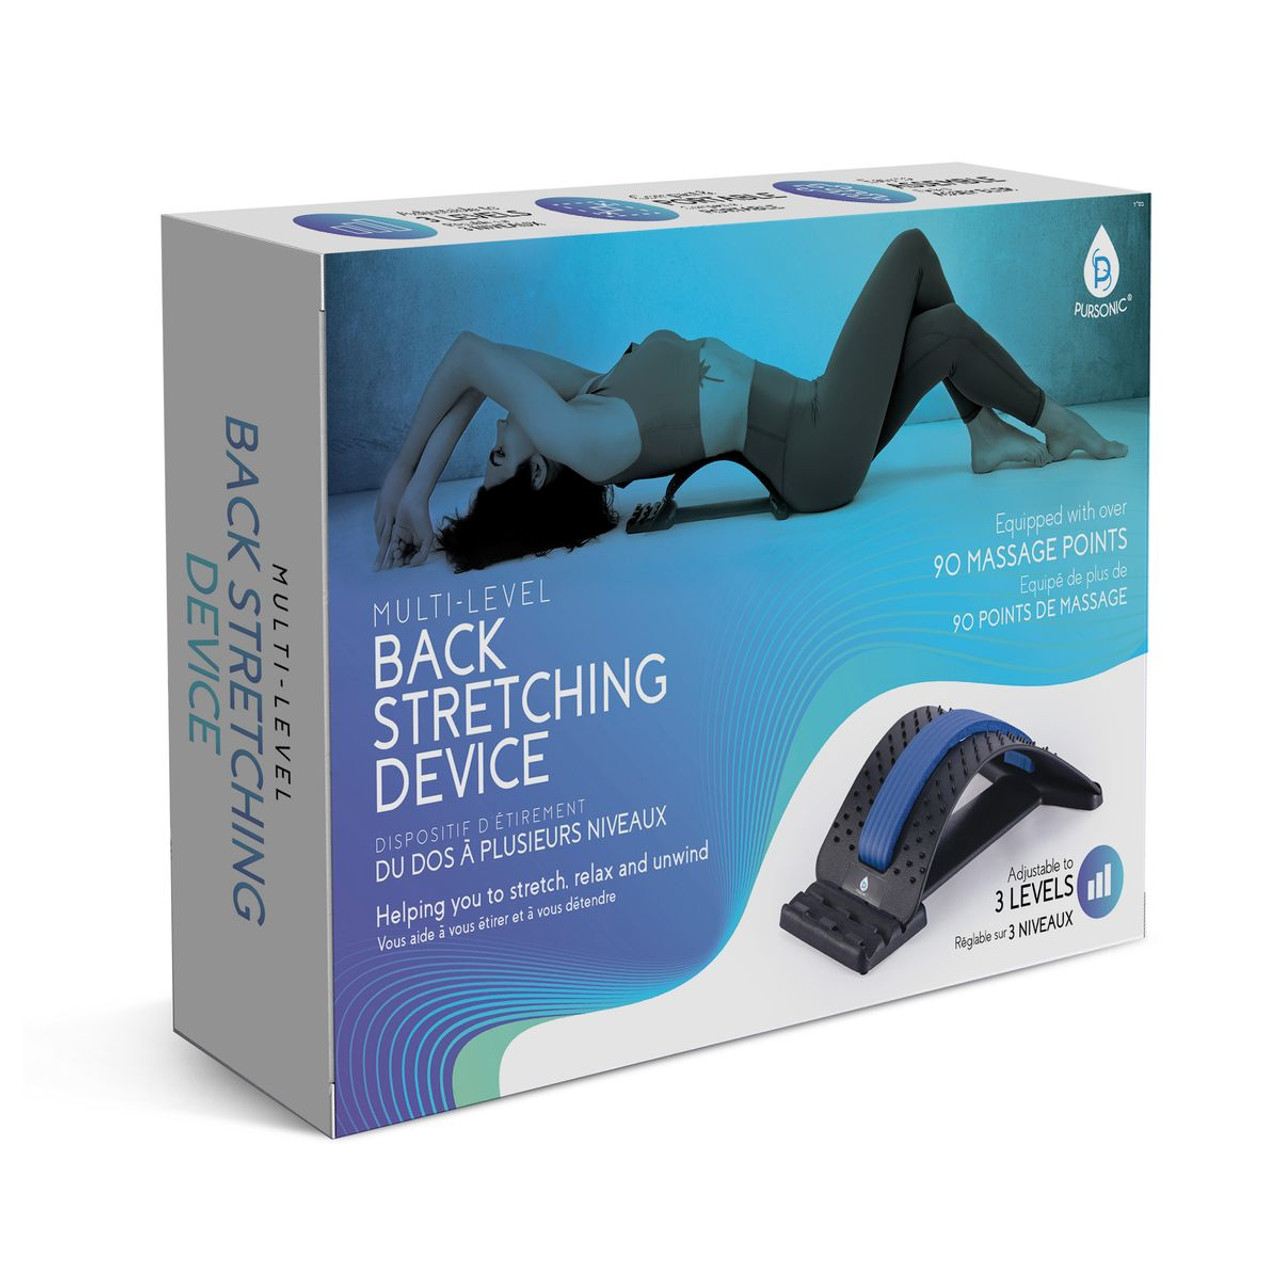 Multi-Level Back Stretching Device by Pursonic® product image